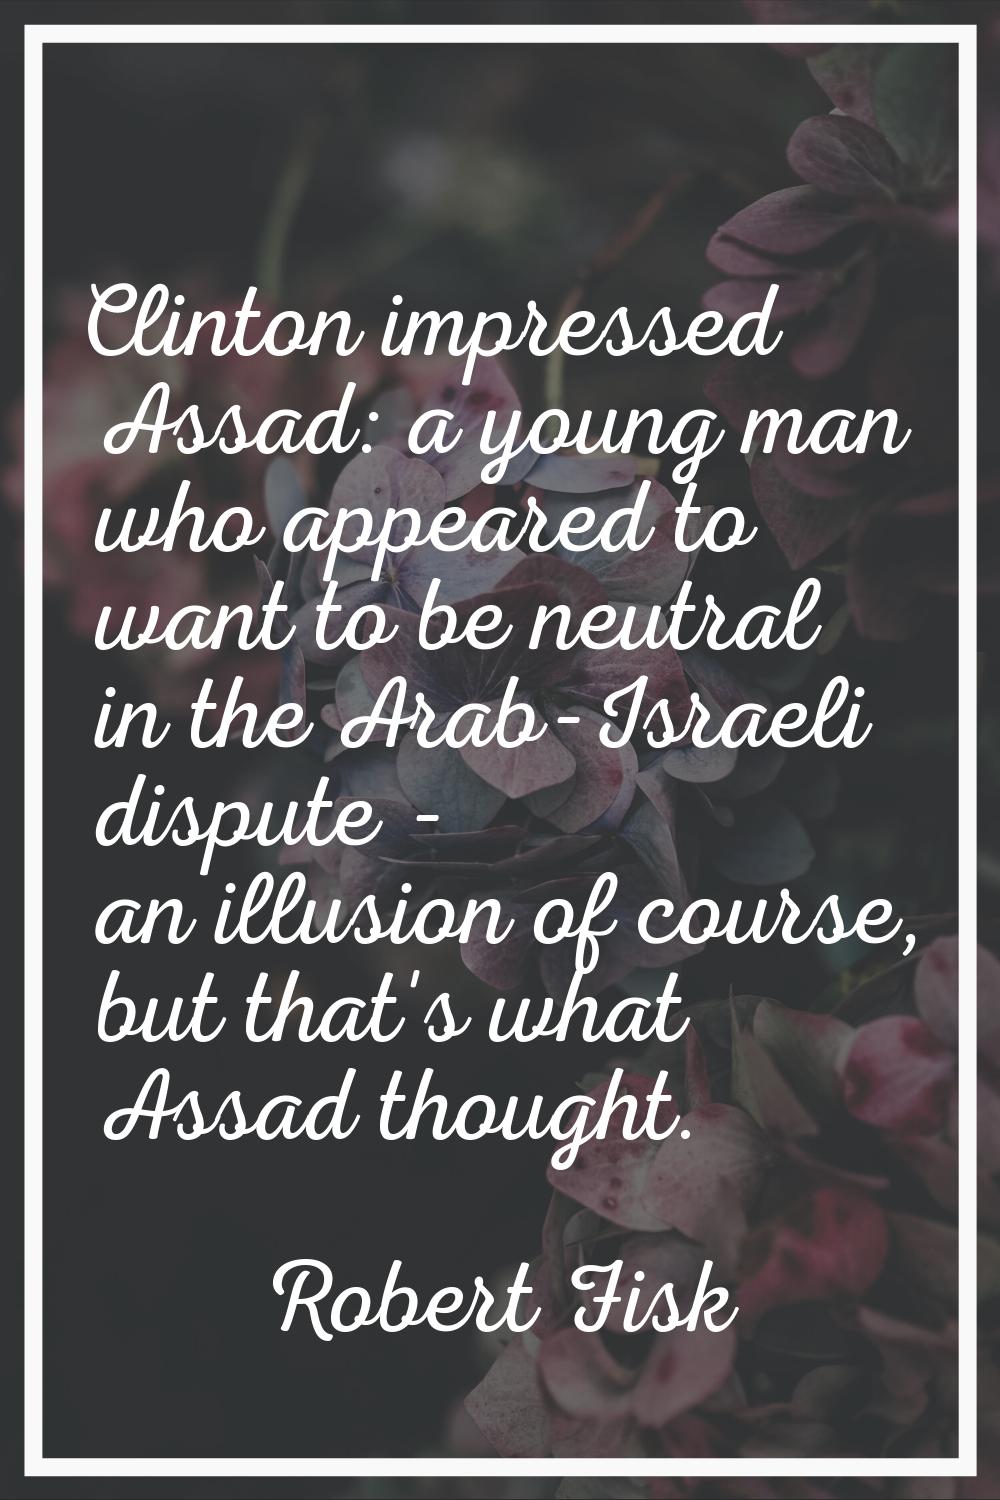 Clinton impressed Assad: a young man who appeared to want to be neutral in the Arab-Israeli dispute